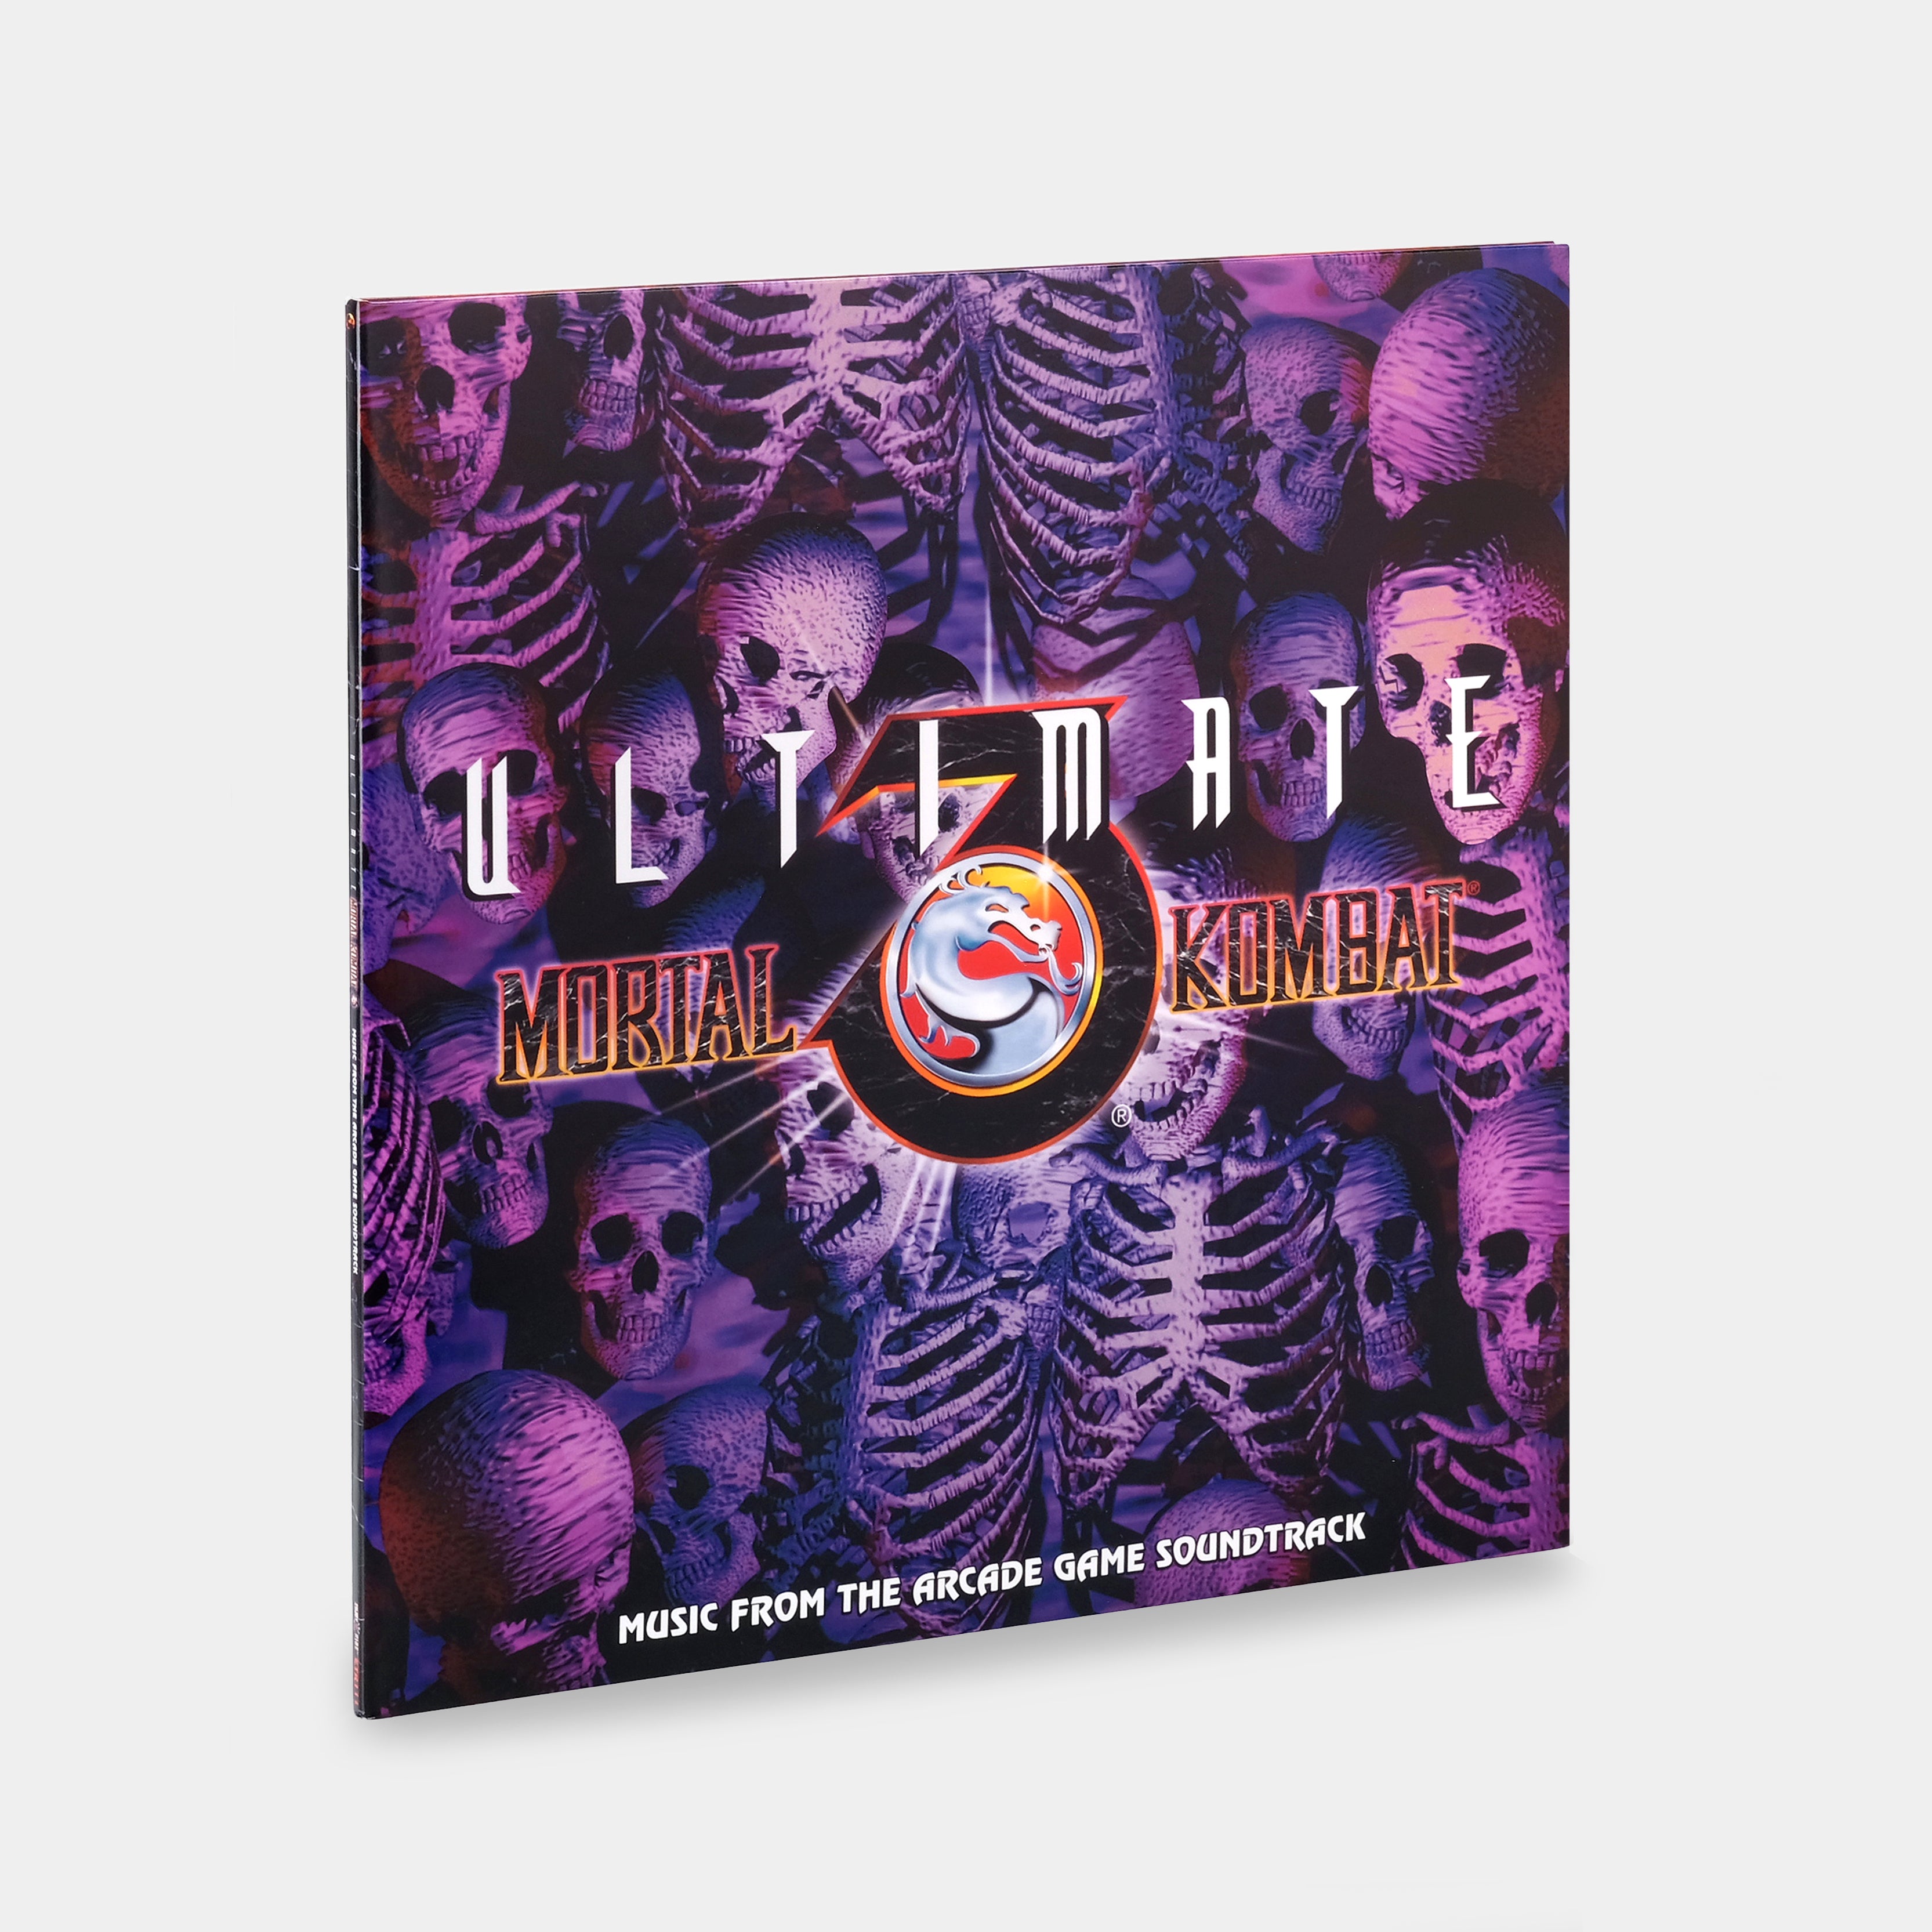 Dan Forden - Ultimate Mortal Kombat 3: Music From The Arcade Game Soundtrack LP Silver & Red Swirl Vinyl Record